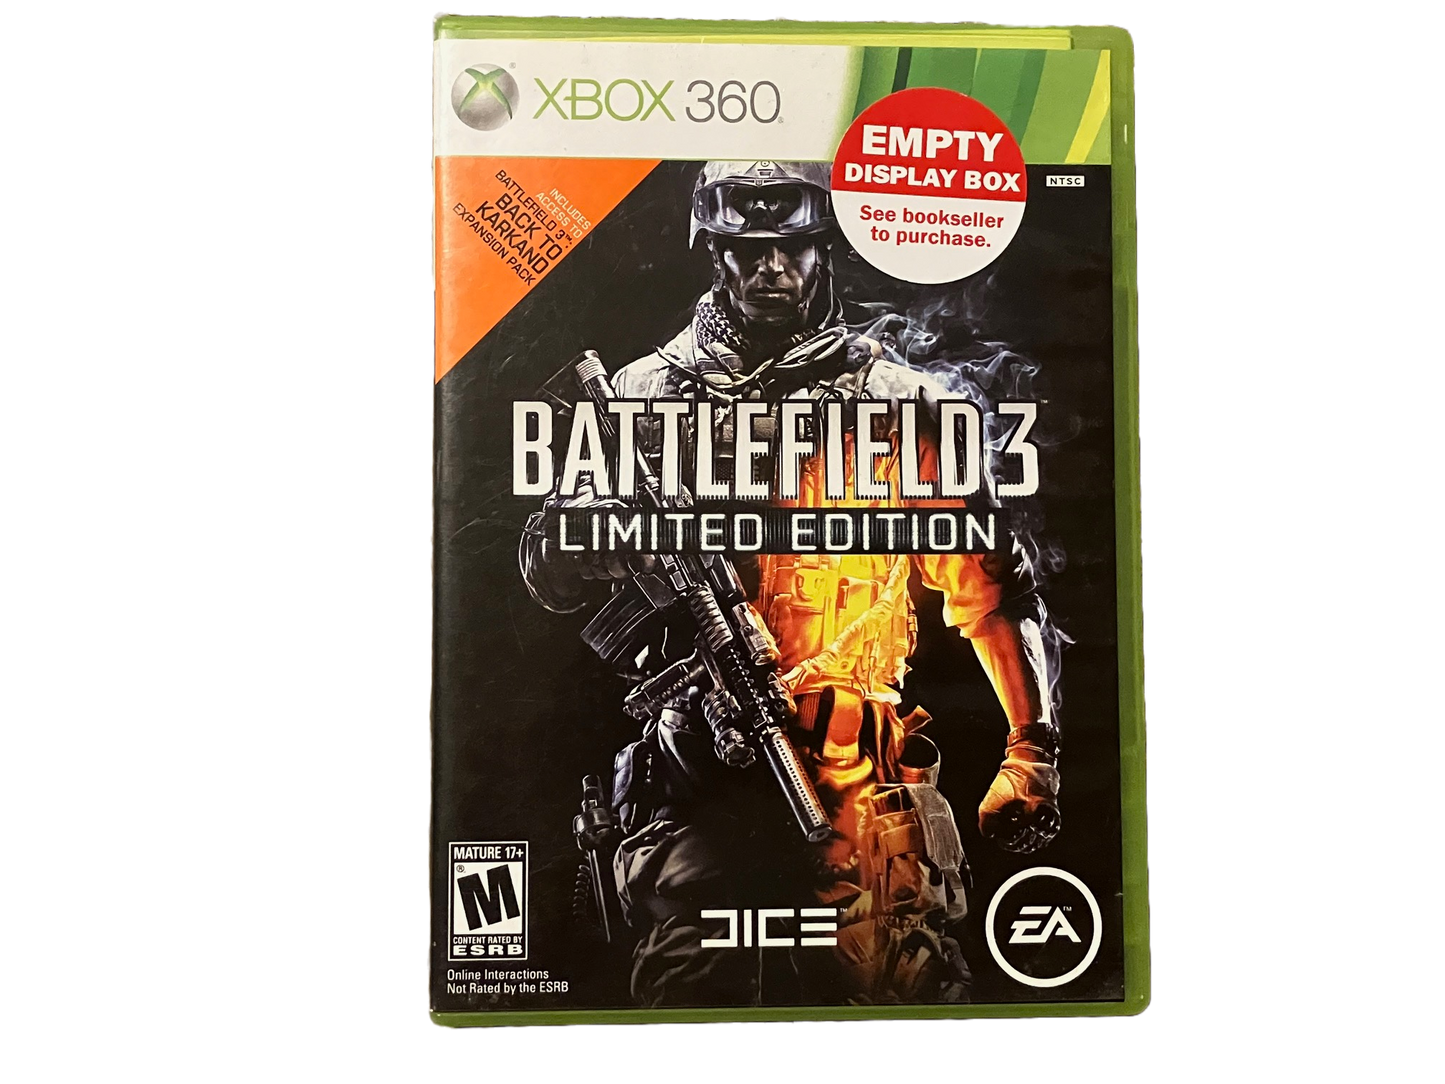 Battlefield 3 Limited Edition Xbox 360. Complete